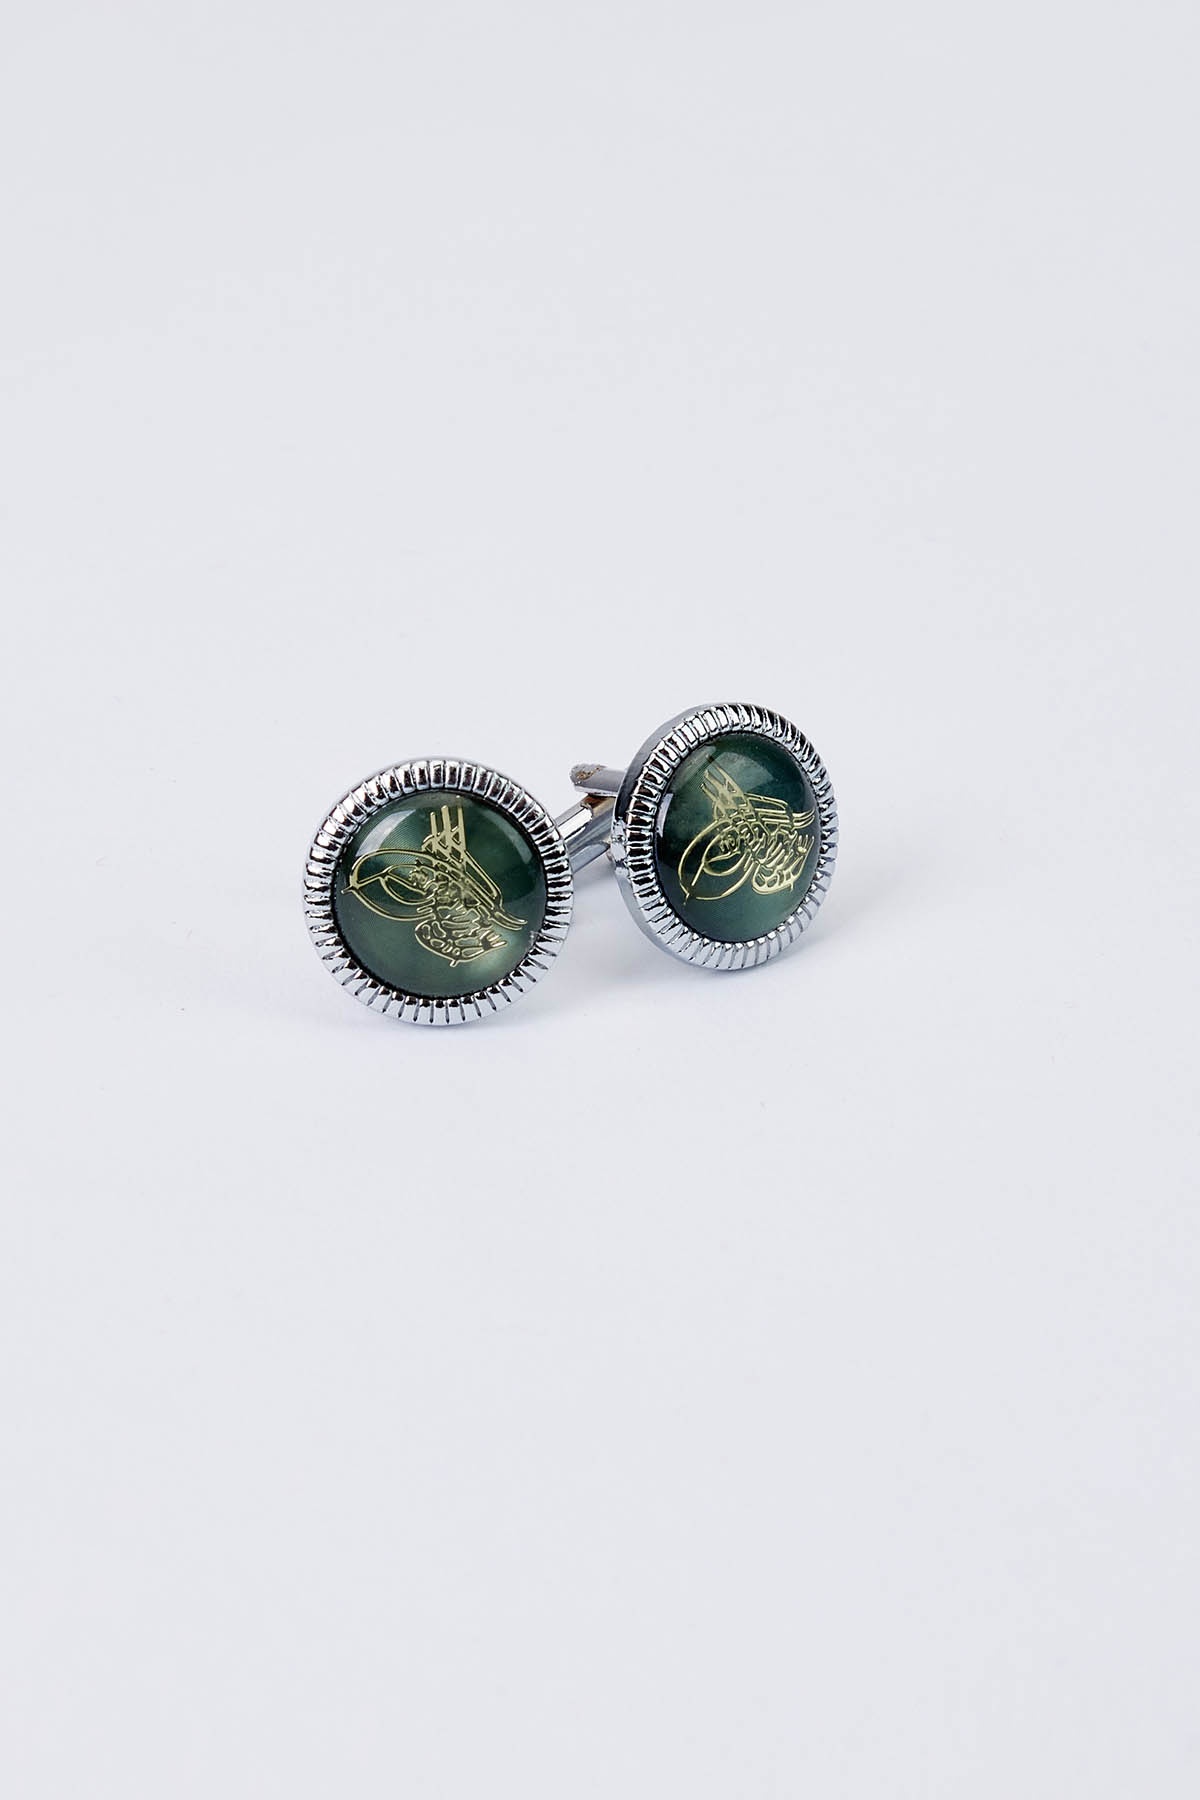 Patterned Characoal Cufflink